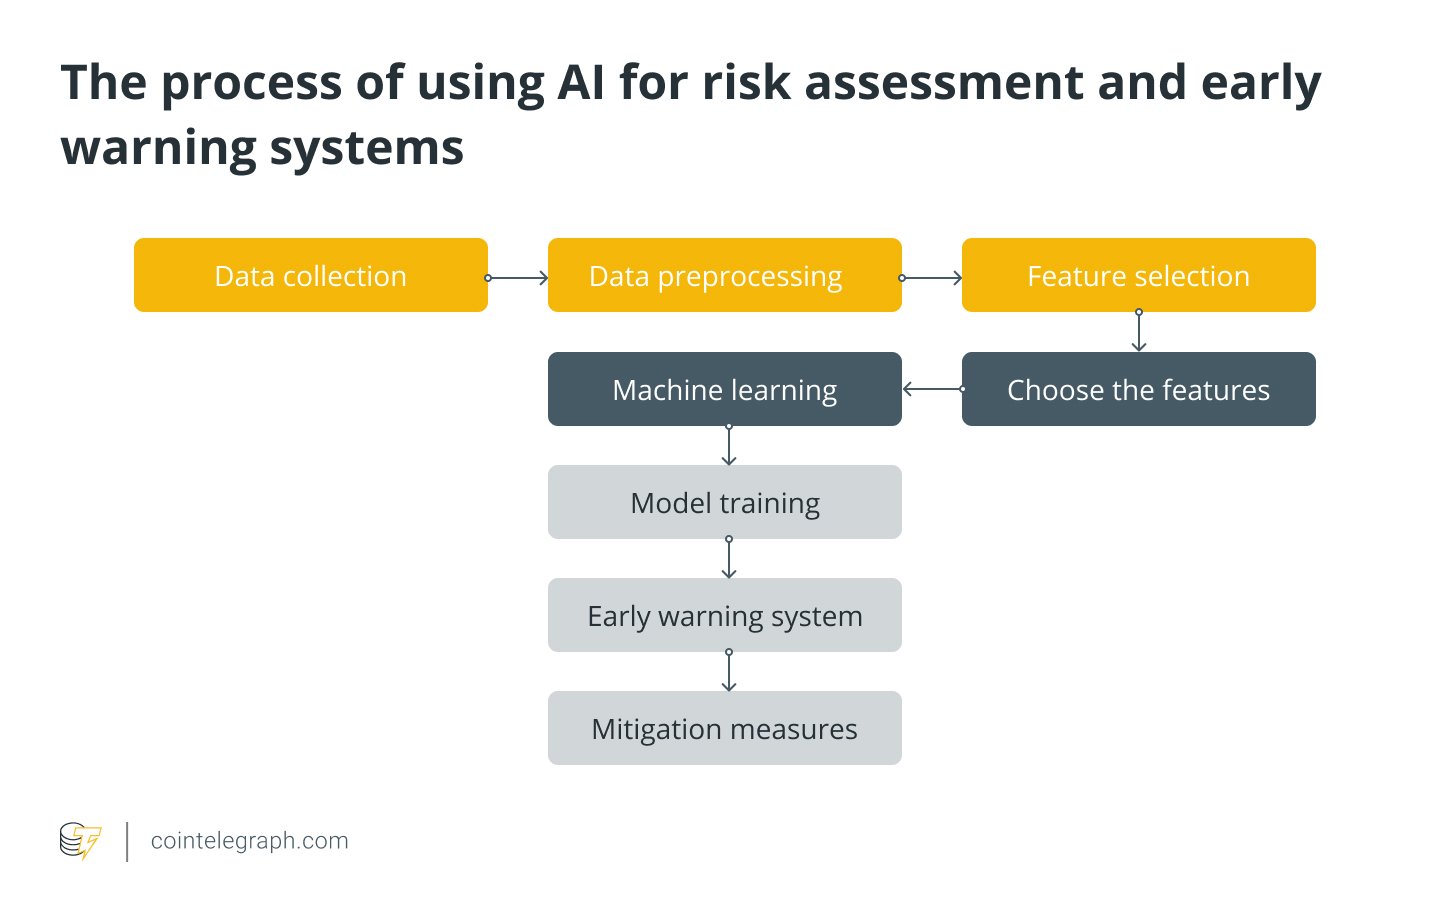 The process of using AI for risk assessment and early warning systems